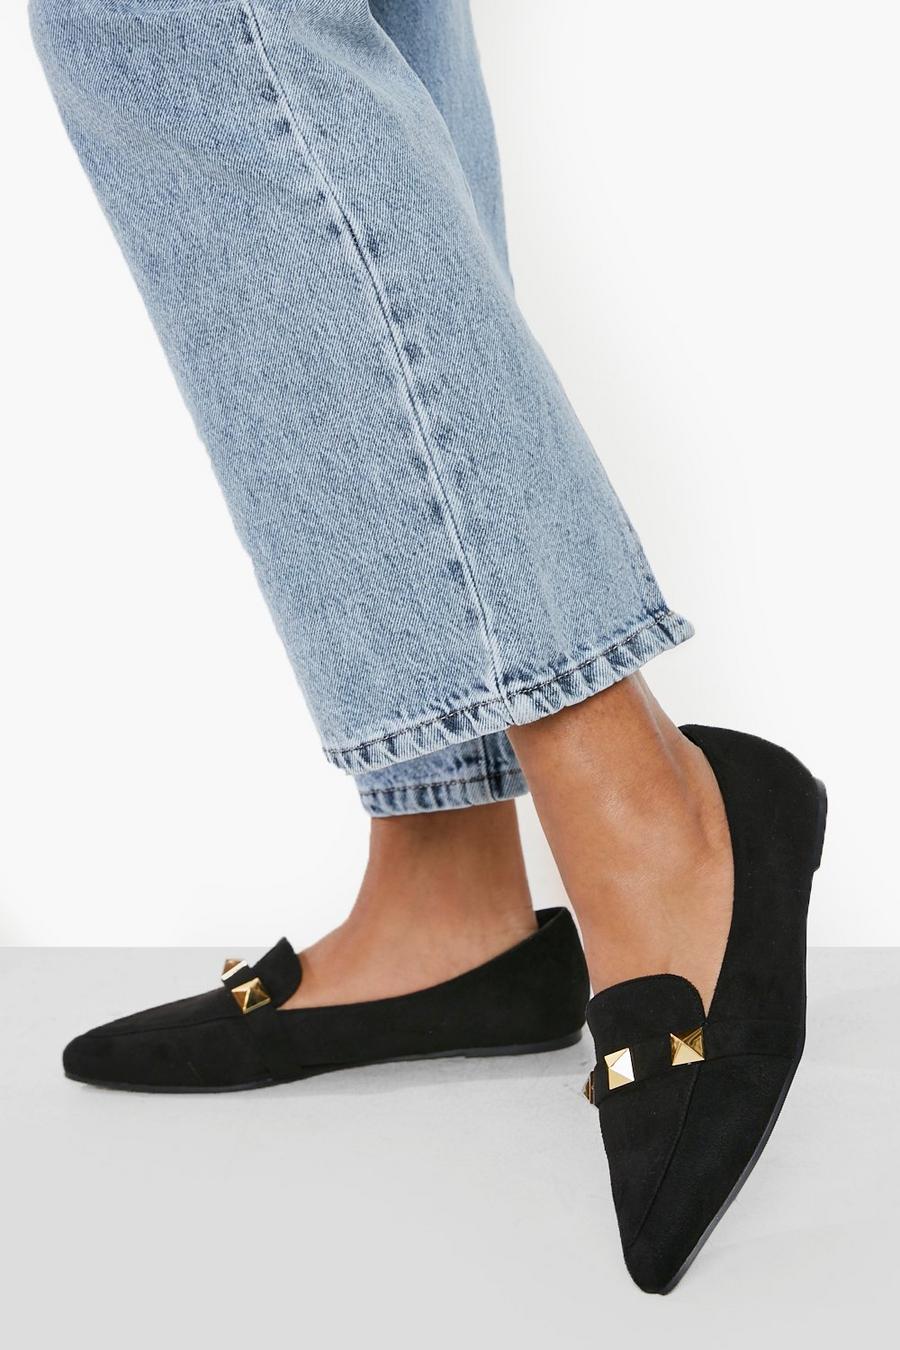 Boohoo Wide Fit Buckle Detail Sliders in Black Womens Shoes Flats and flat shoes Flat sandals 